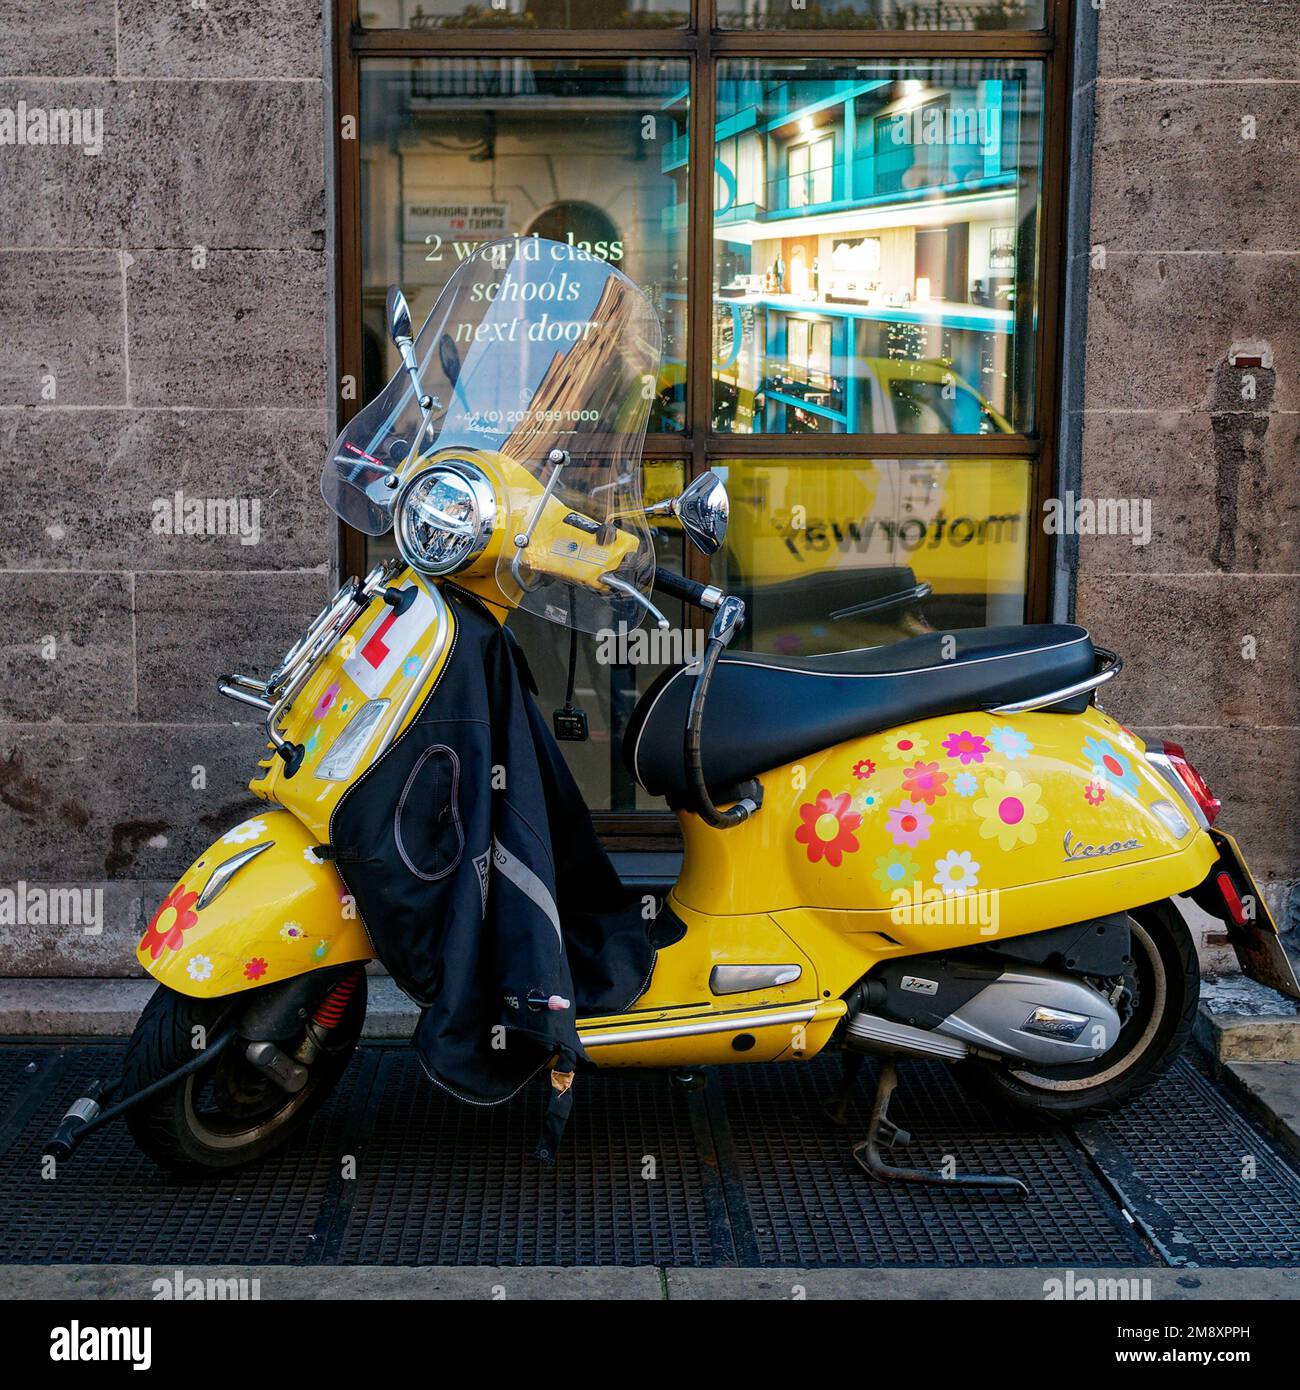 Yellow Vespa aka Scooter with flower design and learner plates in front of a window reflecting a yellow cab aka taxi. London, England Stock Photo